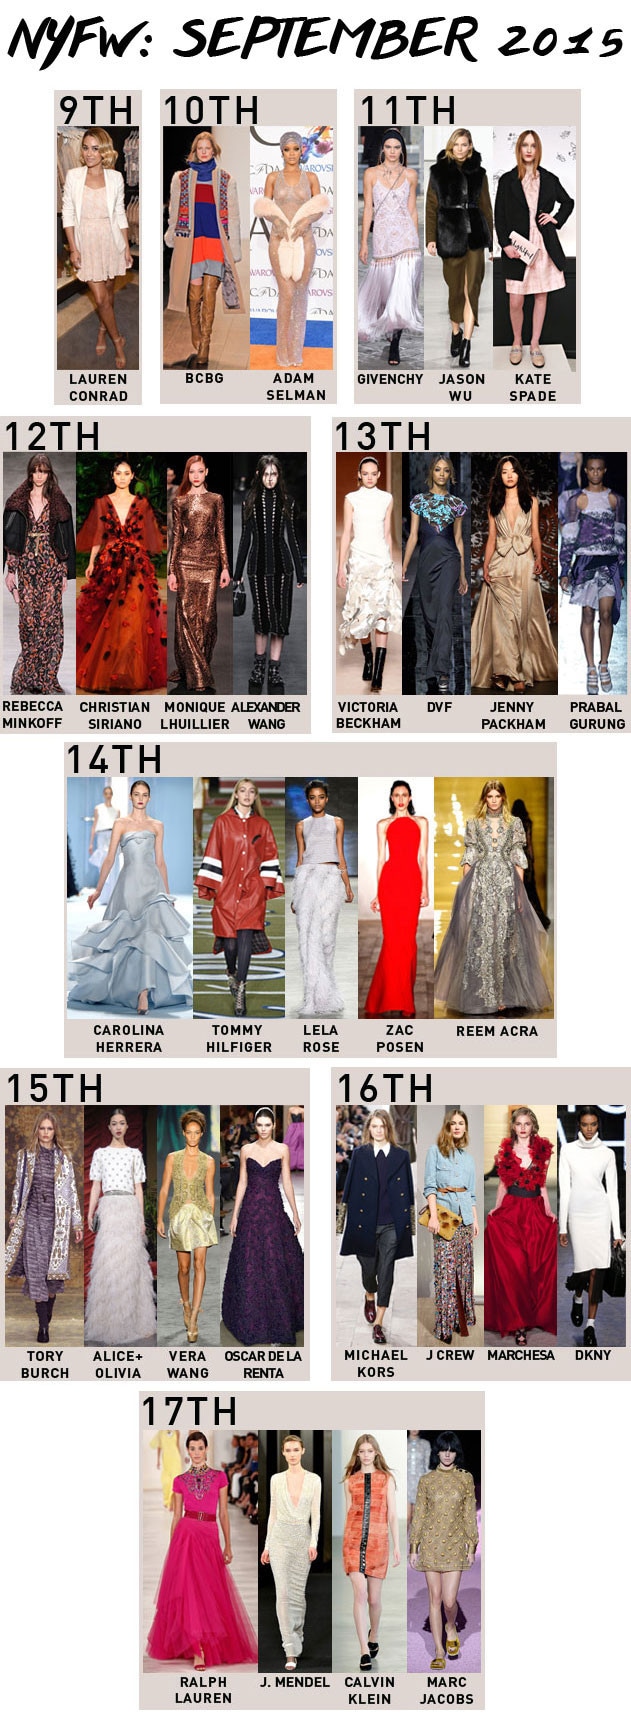 New York Fashion Week Calendar Here's the Short List of Shows You